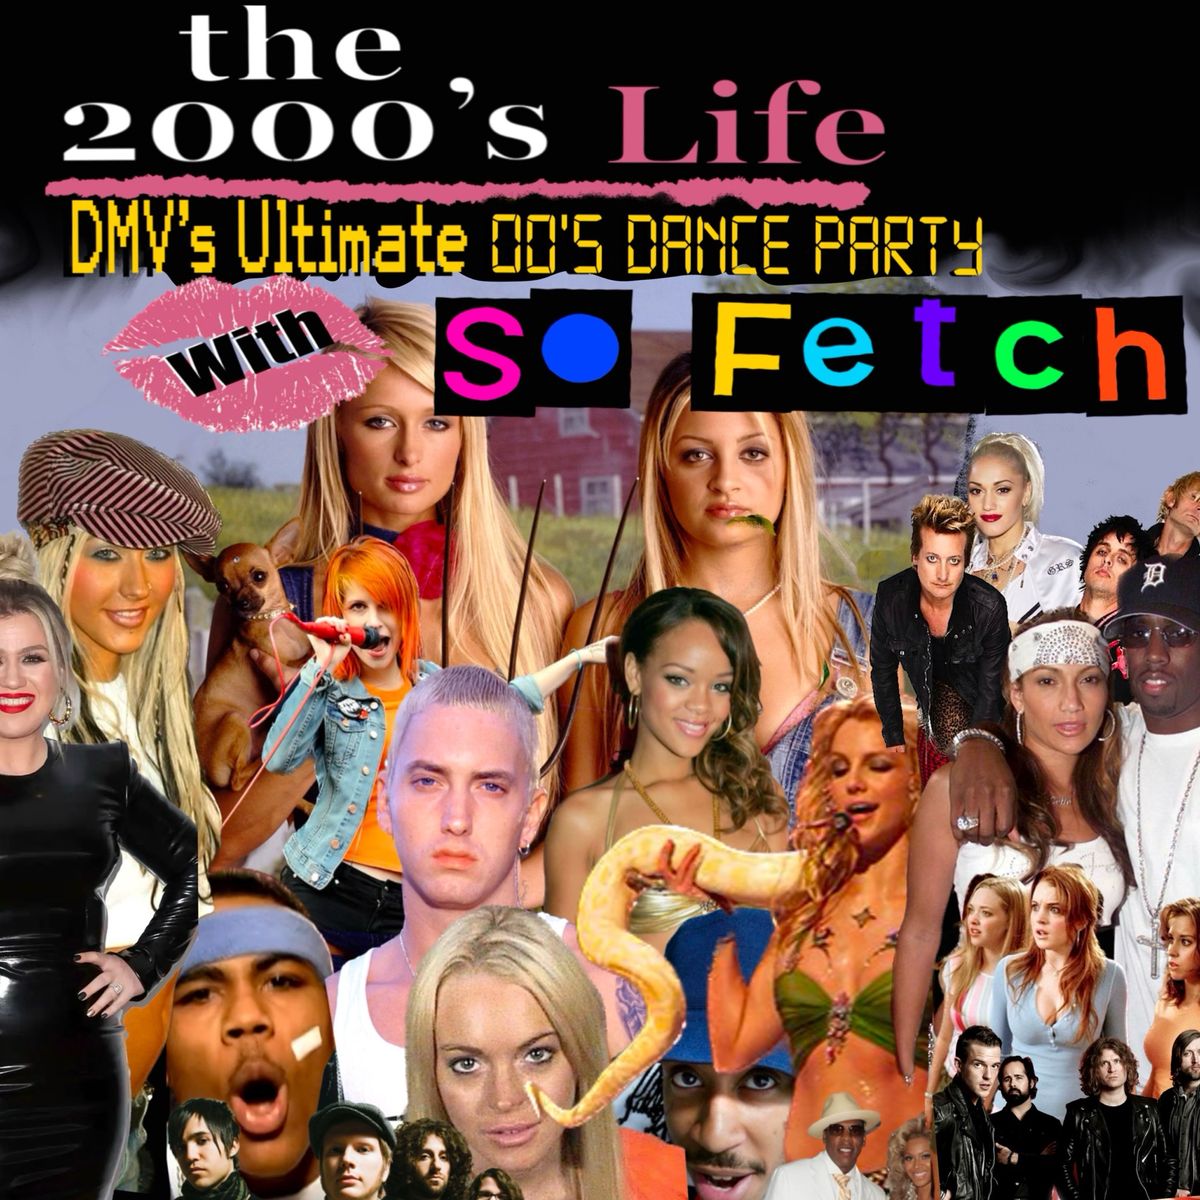 The Ultimate 2000s Dance Party with So Fetch